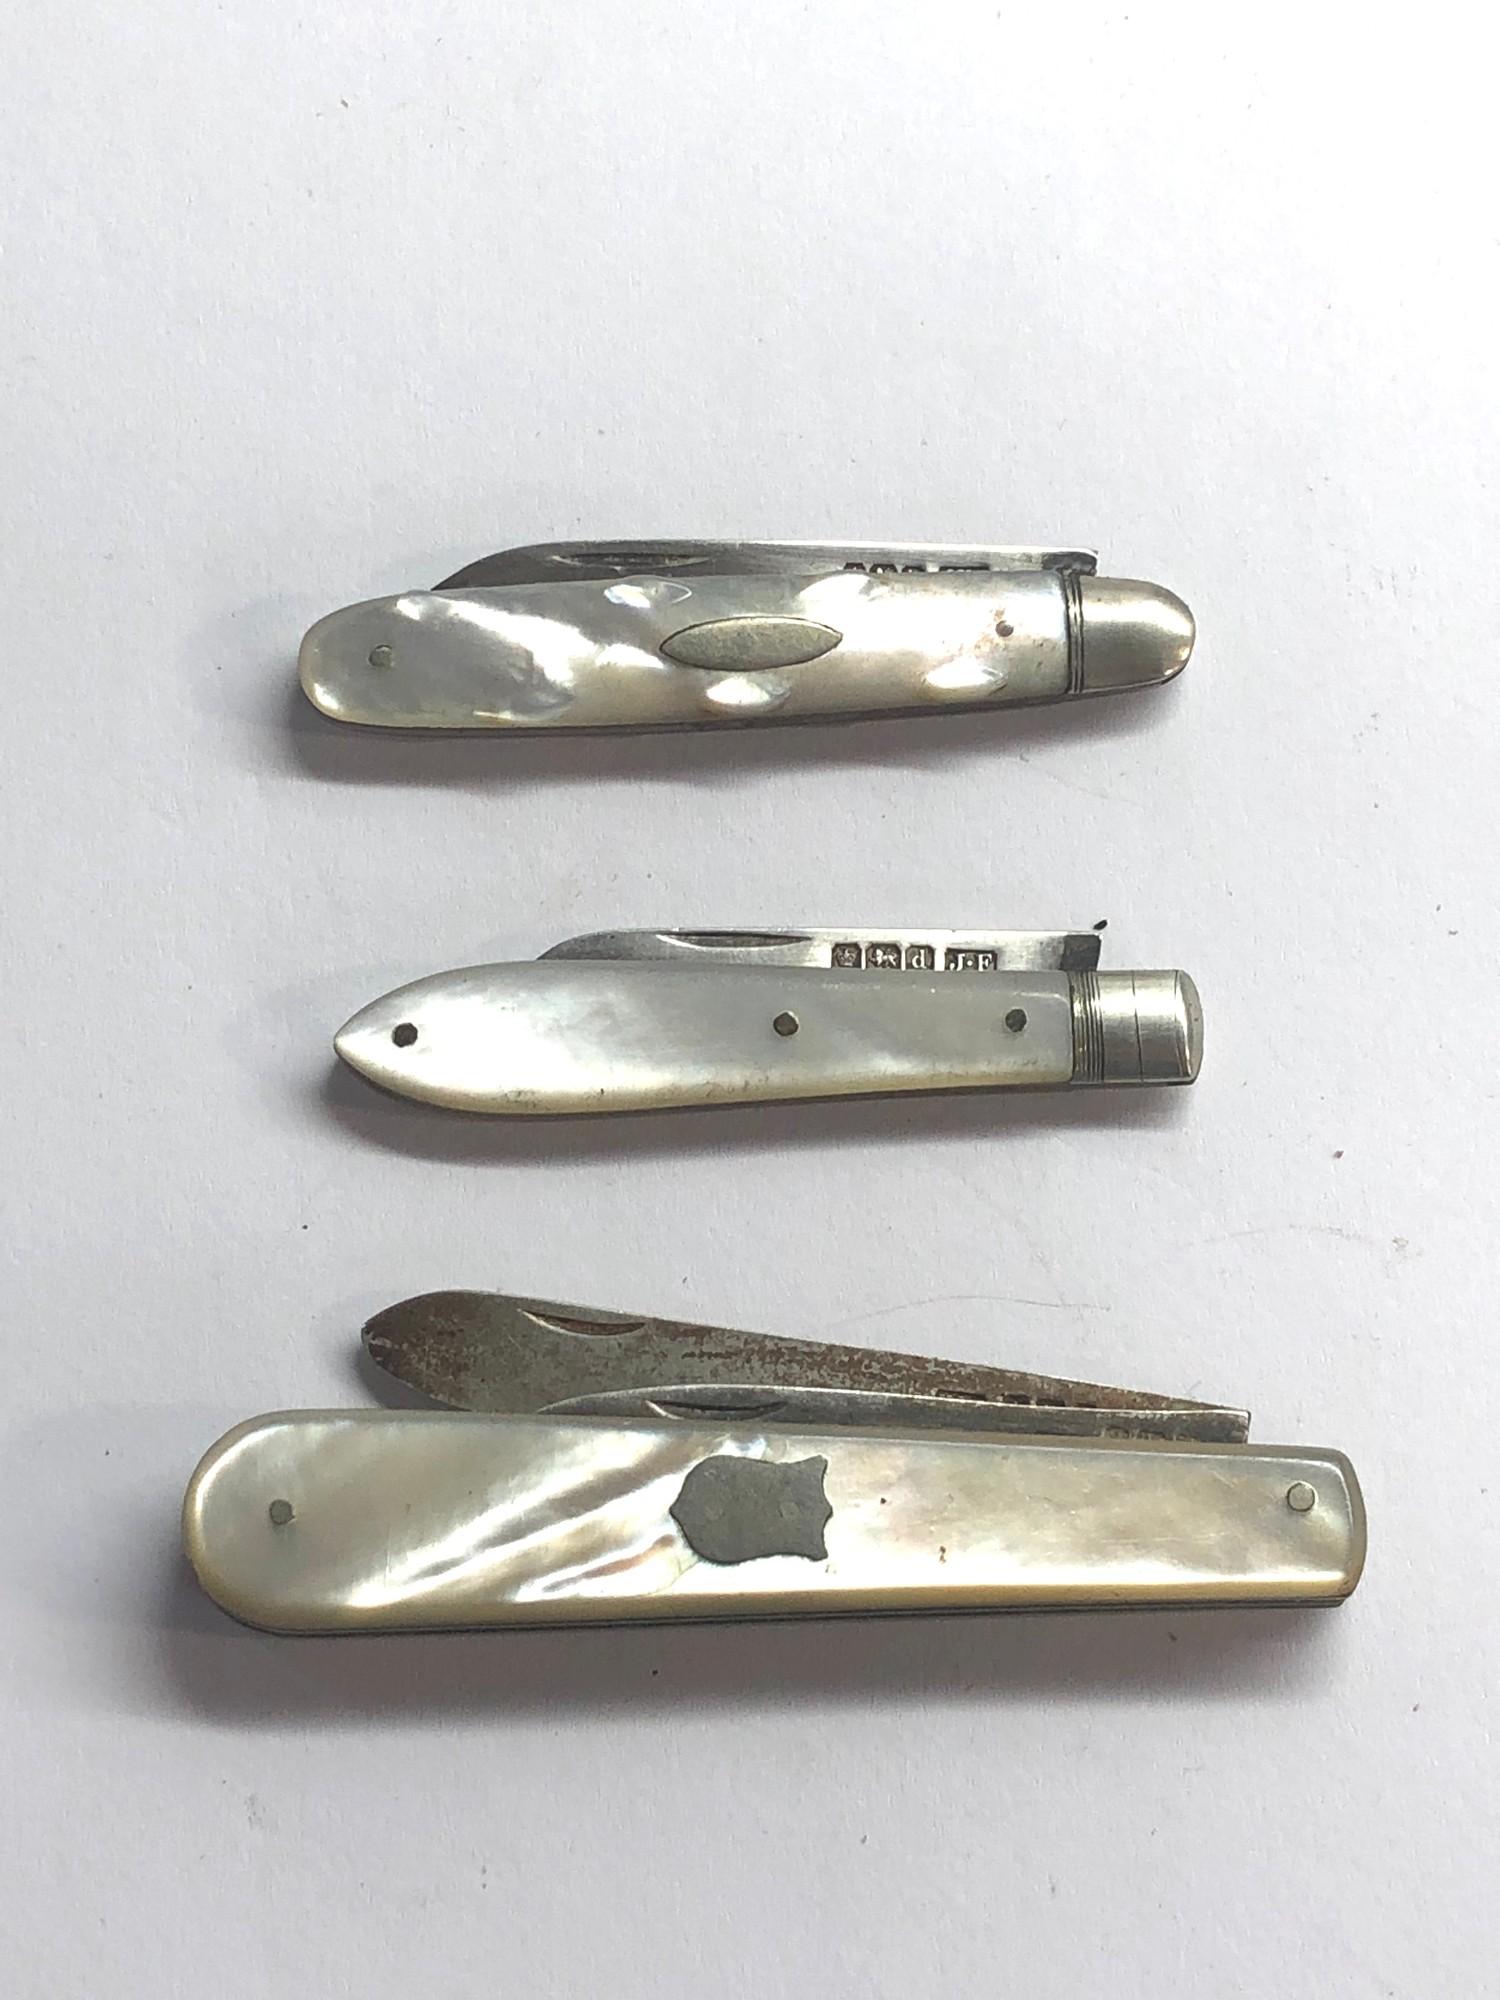 3 antique silver and mother of pearl fruit knives - Image 3 of 3